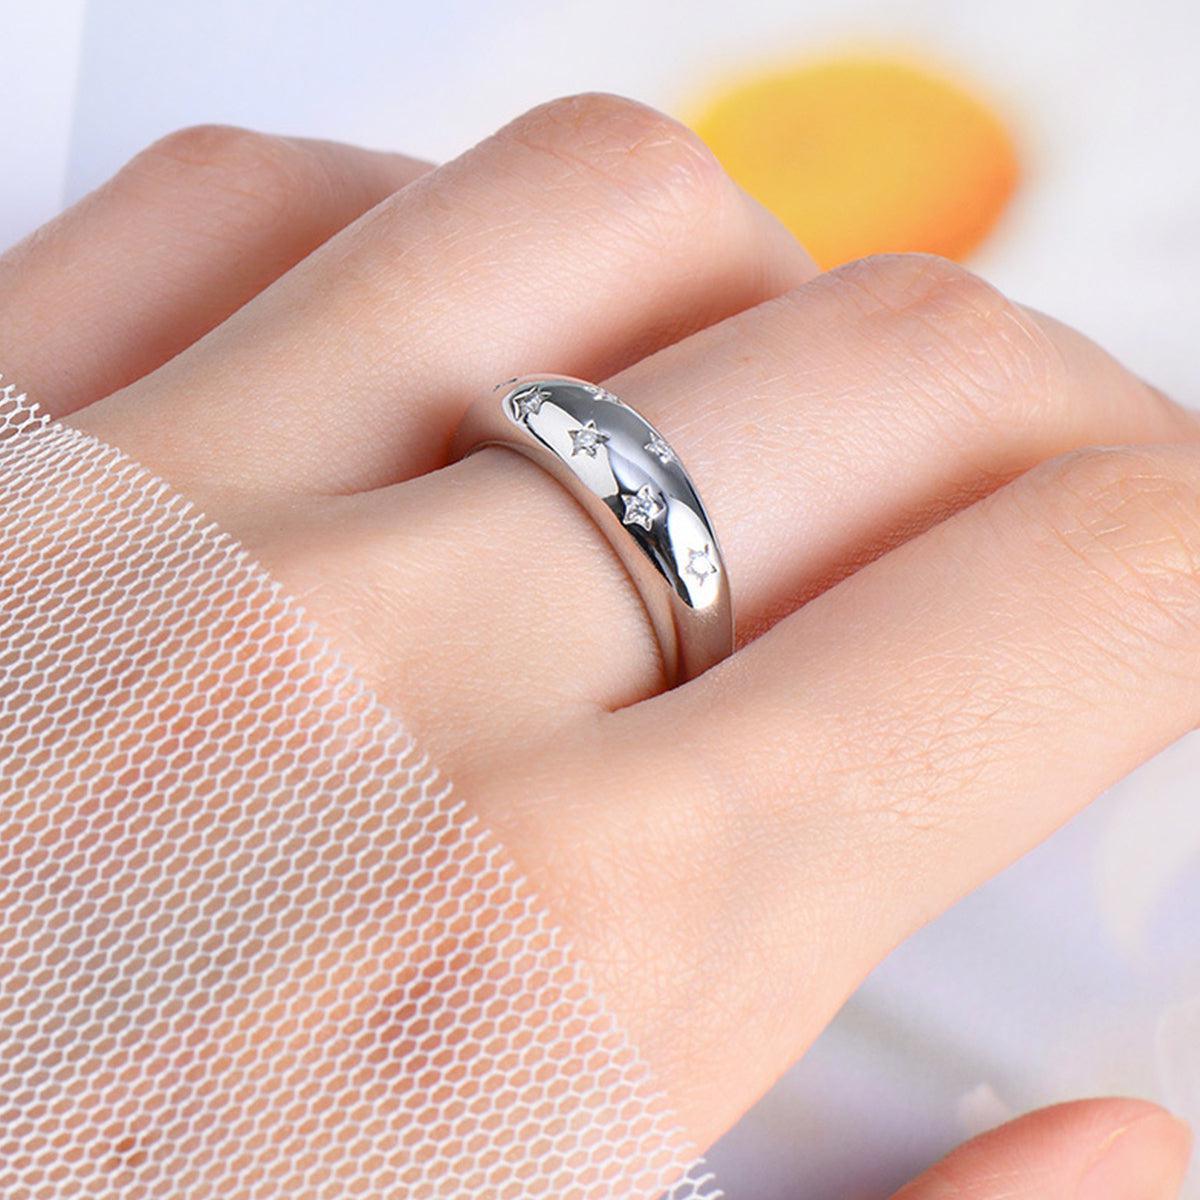 a woman's hand with a wedding ring on it